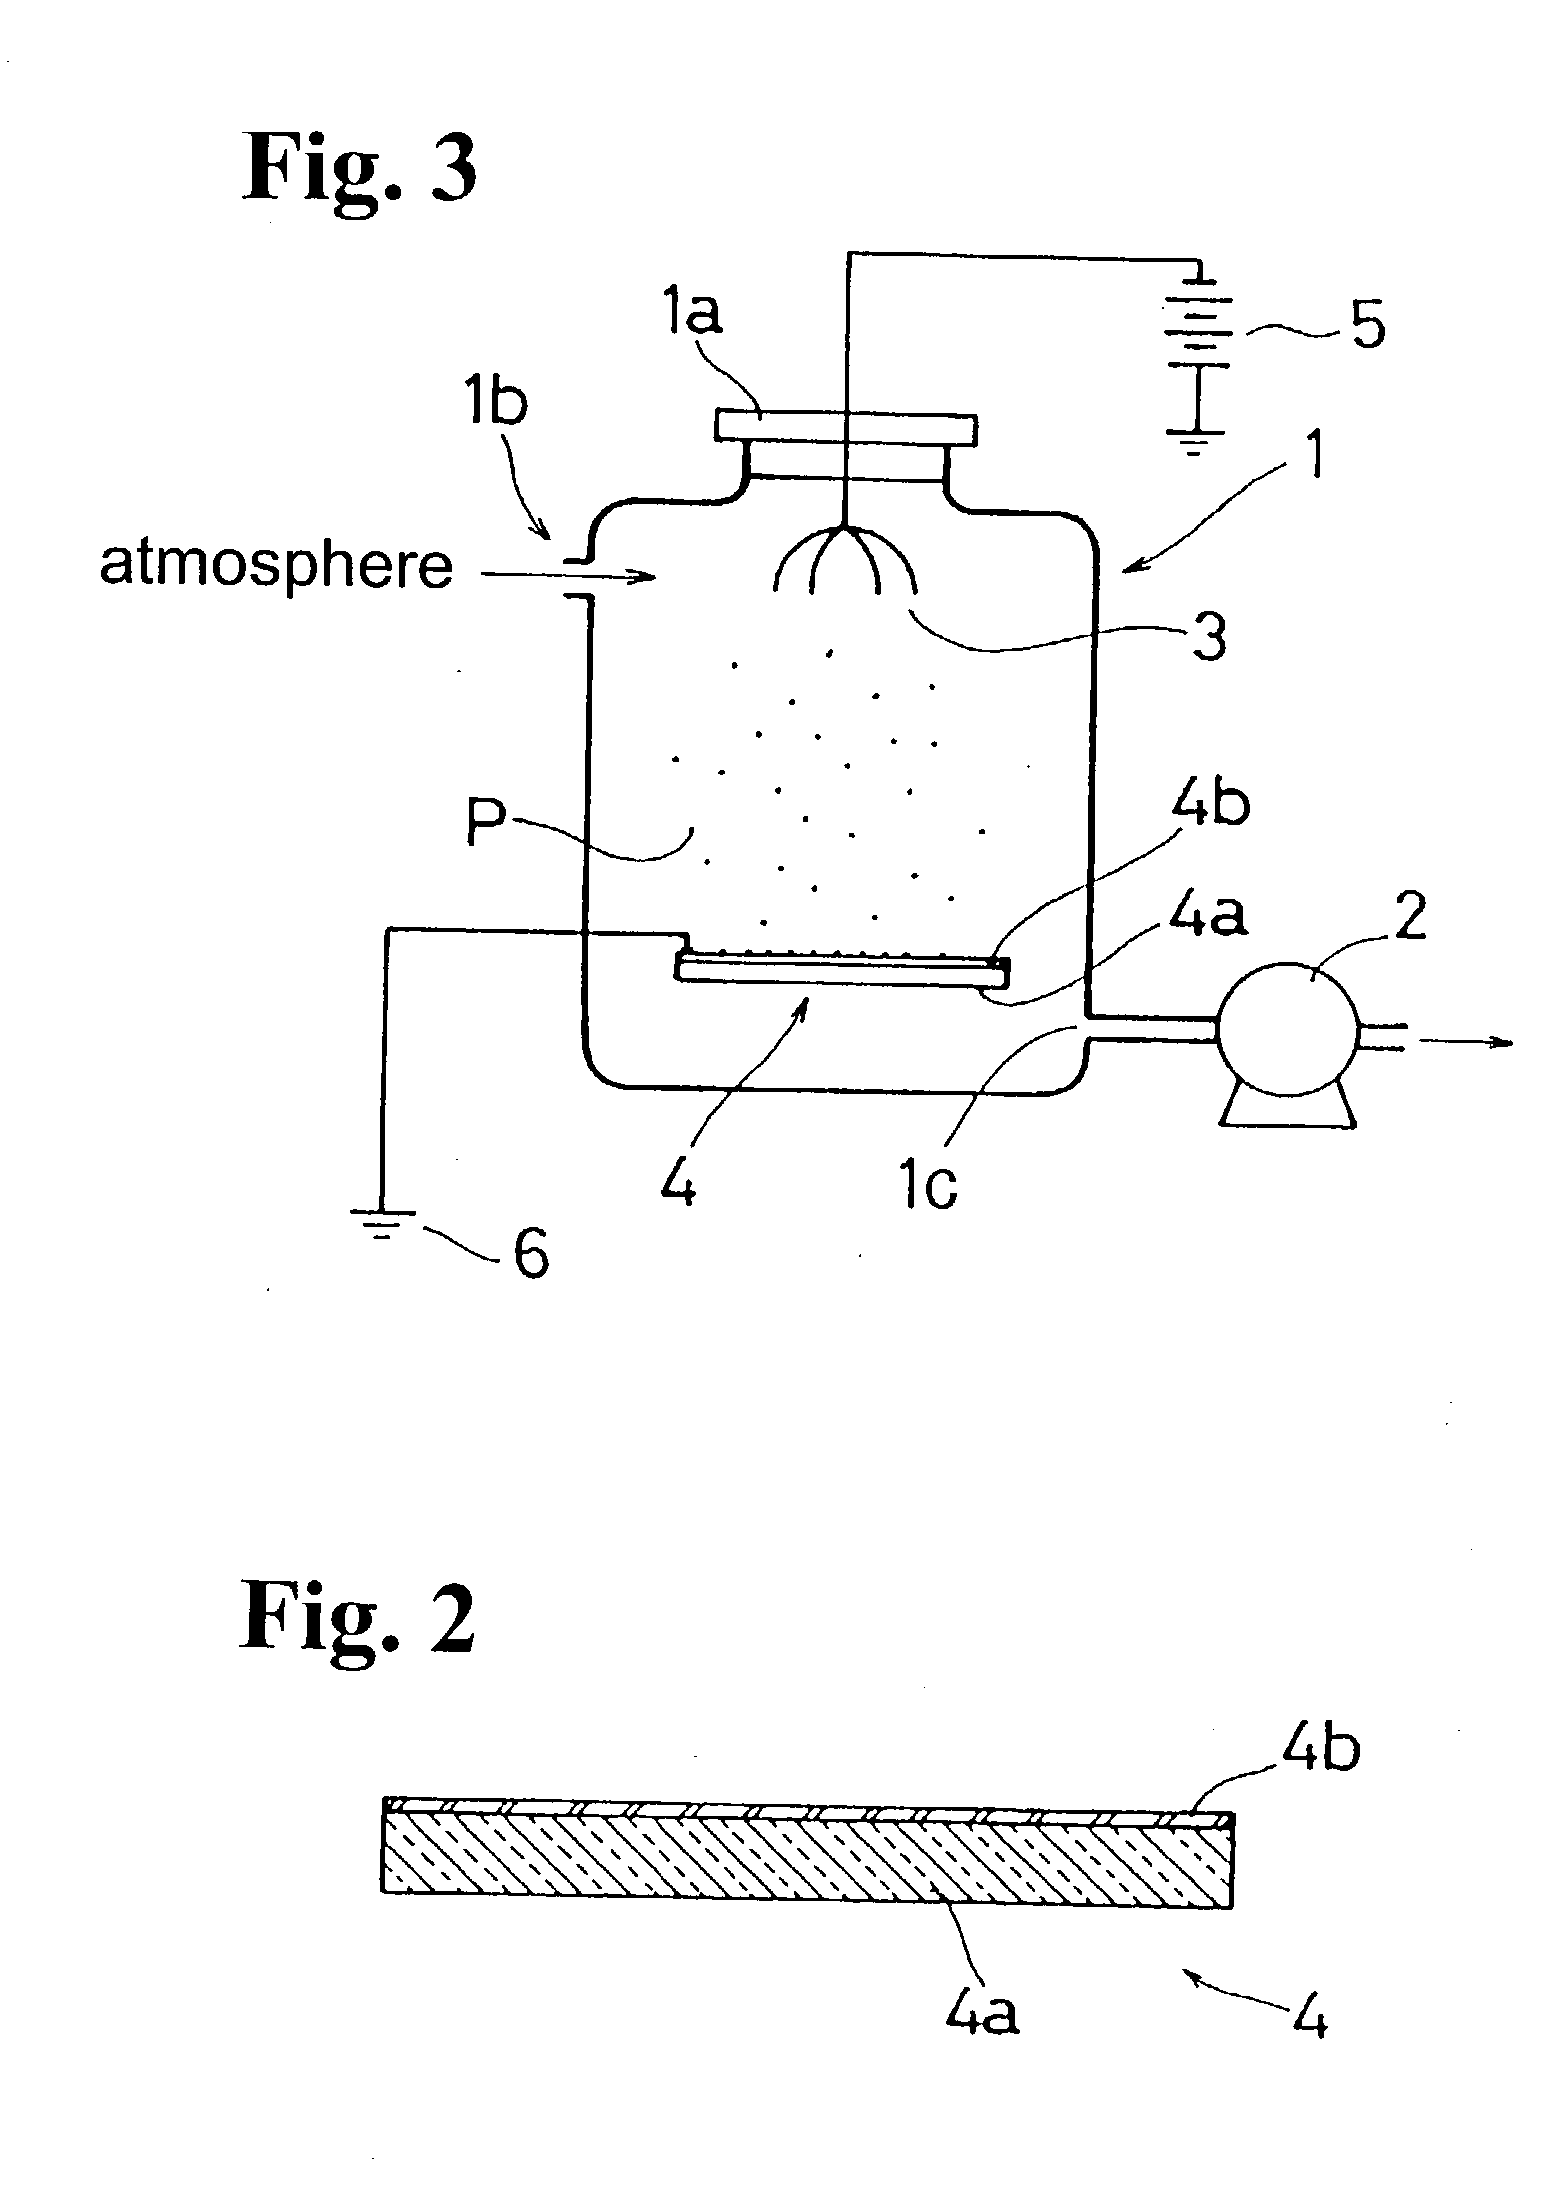 Collecting apparatus of floating dusts in atmosphere and method for measuring floating dusts